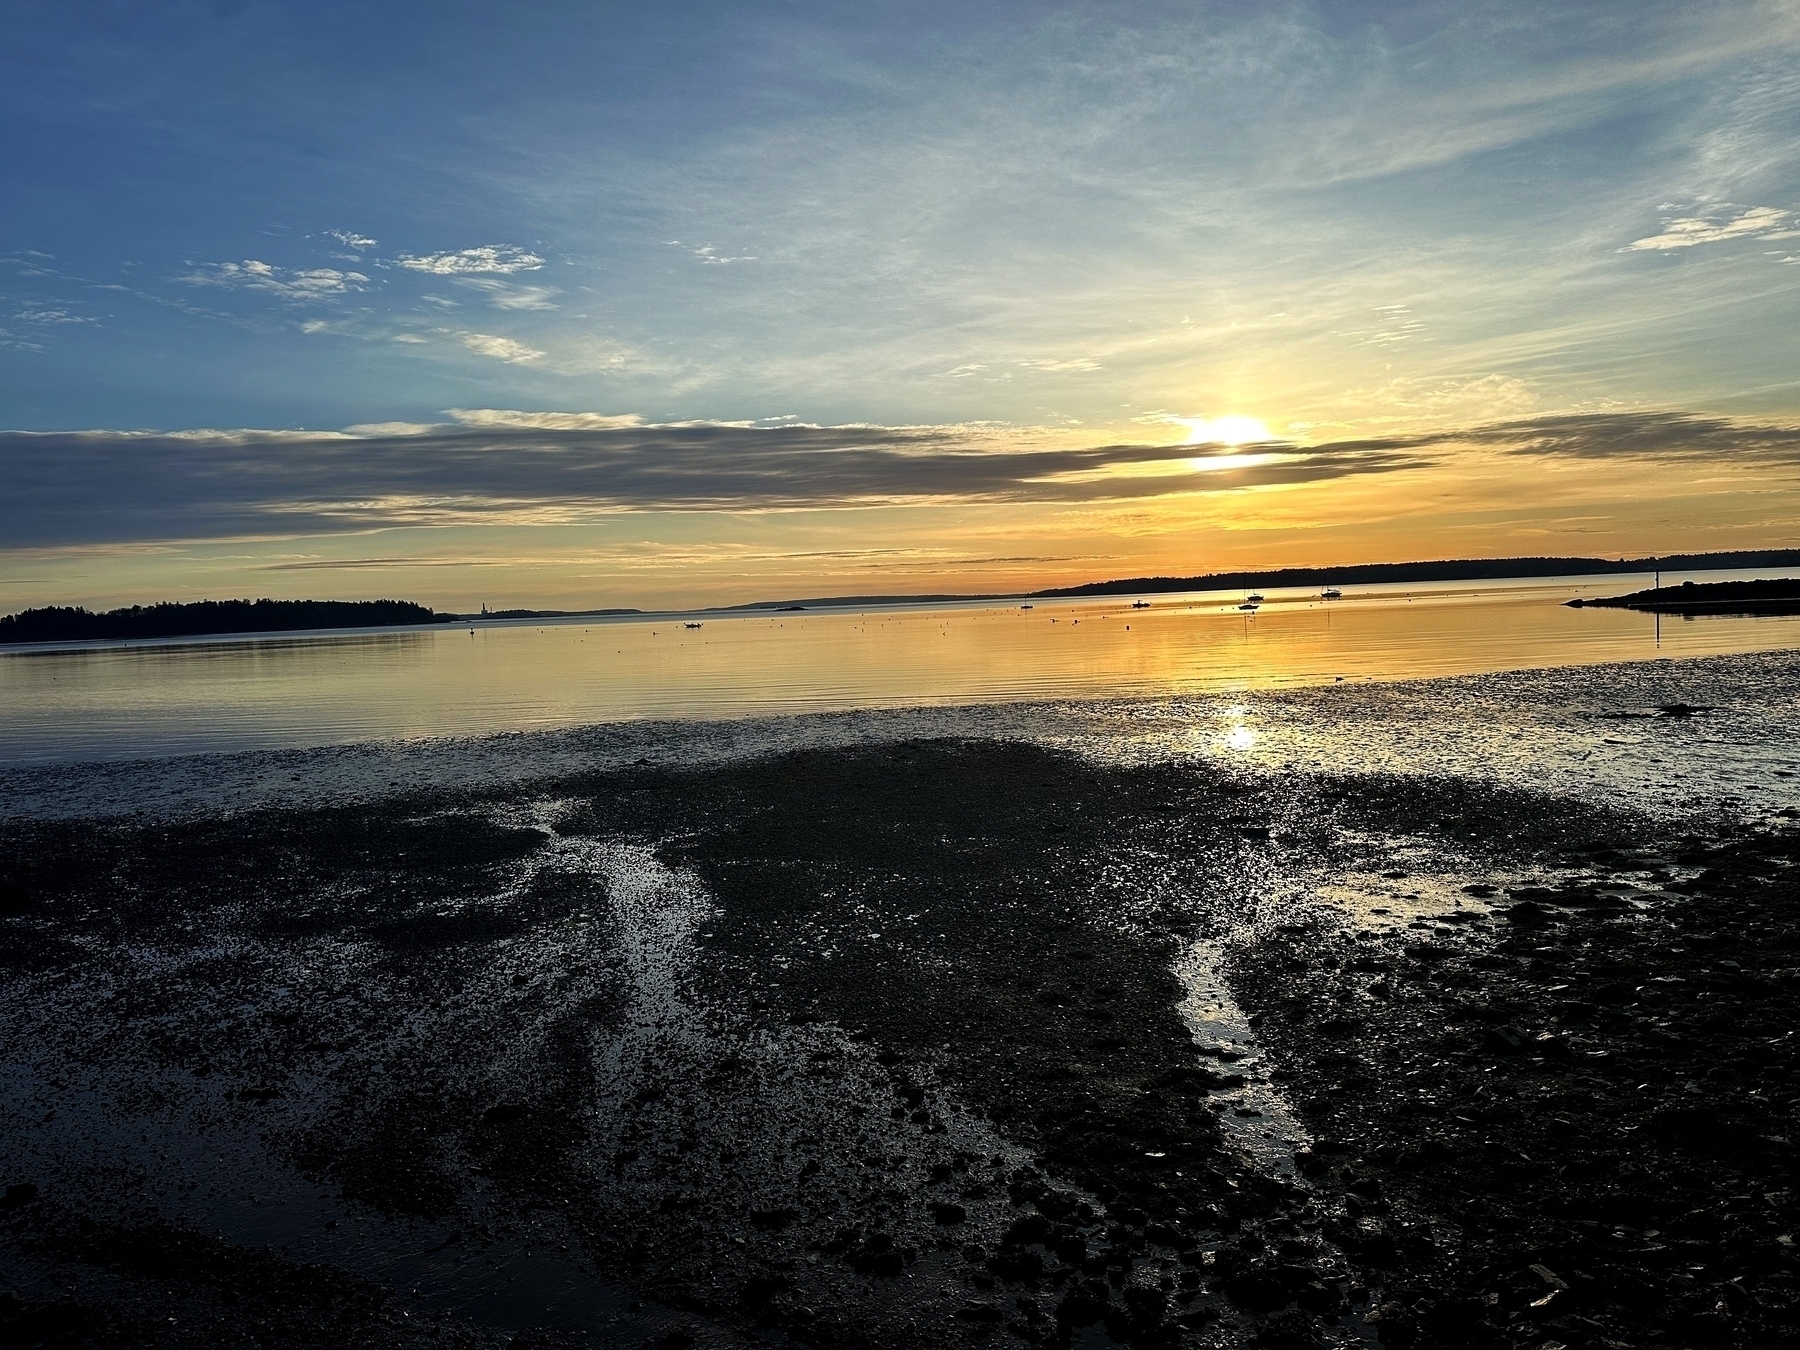 A sunset casts warm light on a calm sea, with silhouettes of boats and land in the distance; wet sand glistens in the foreground.